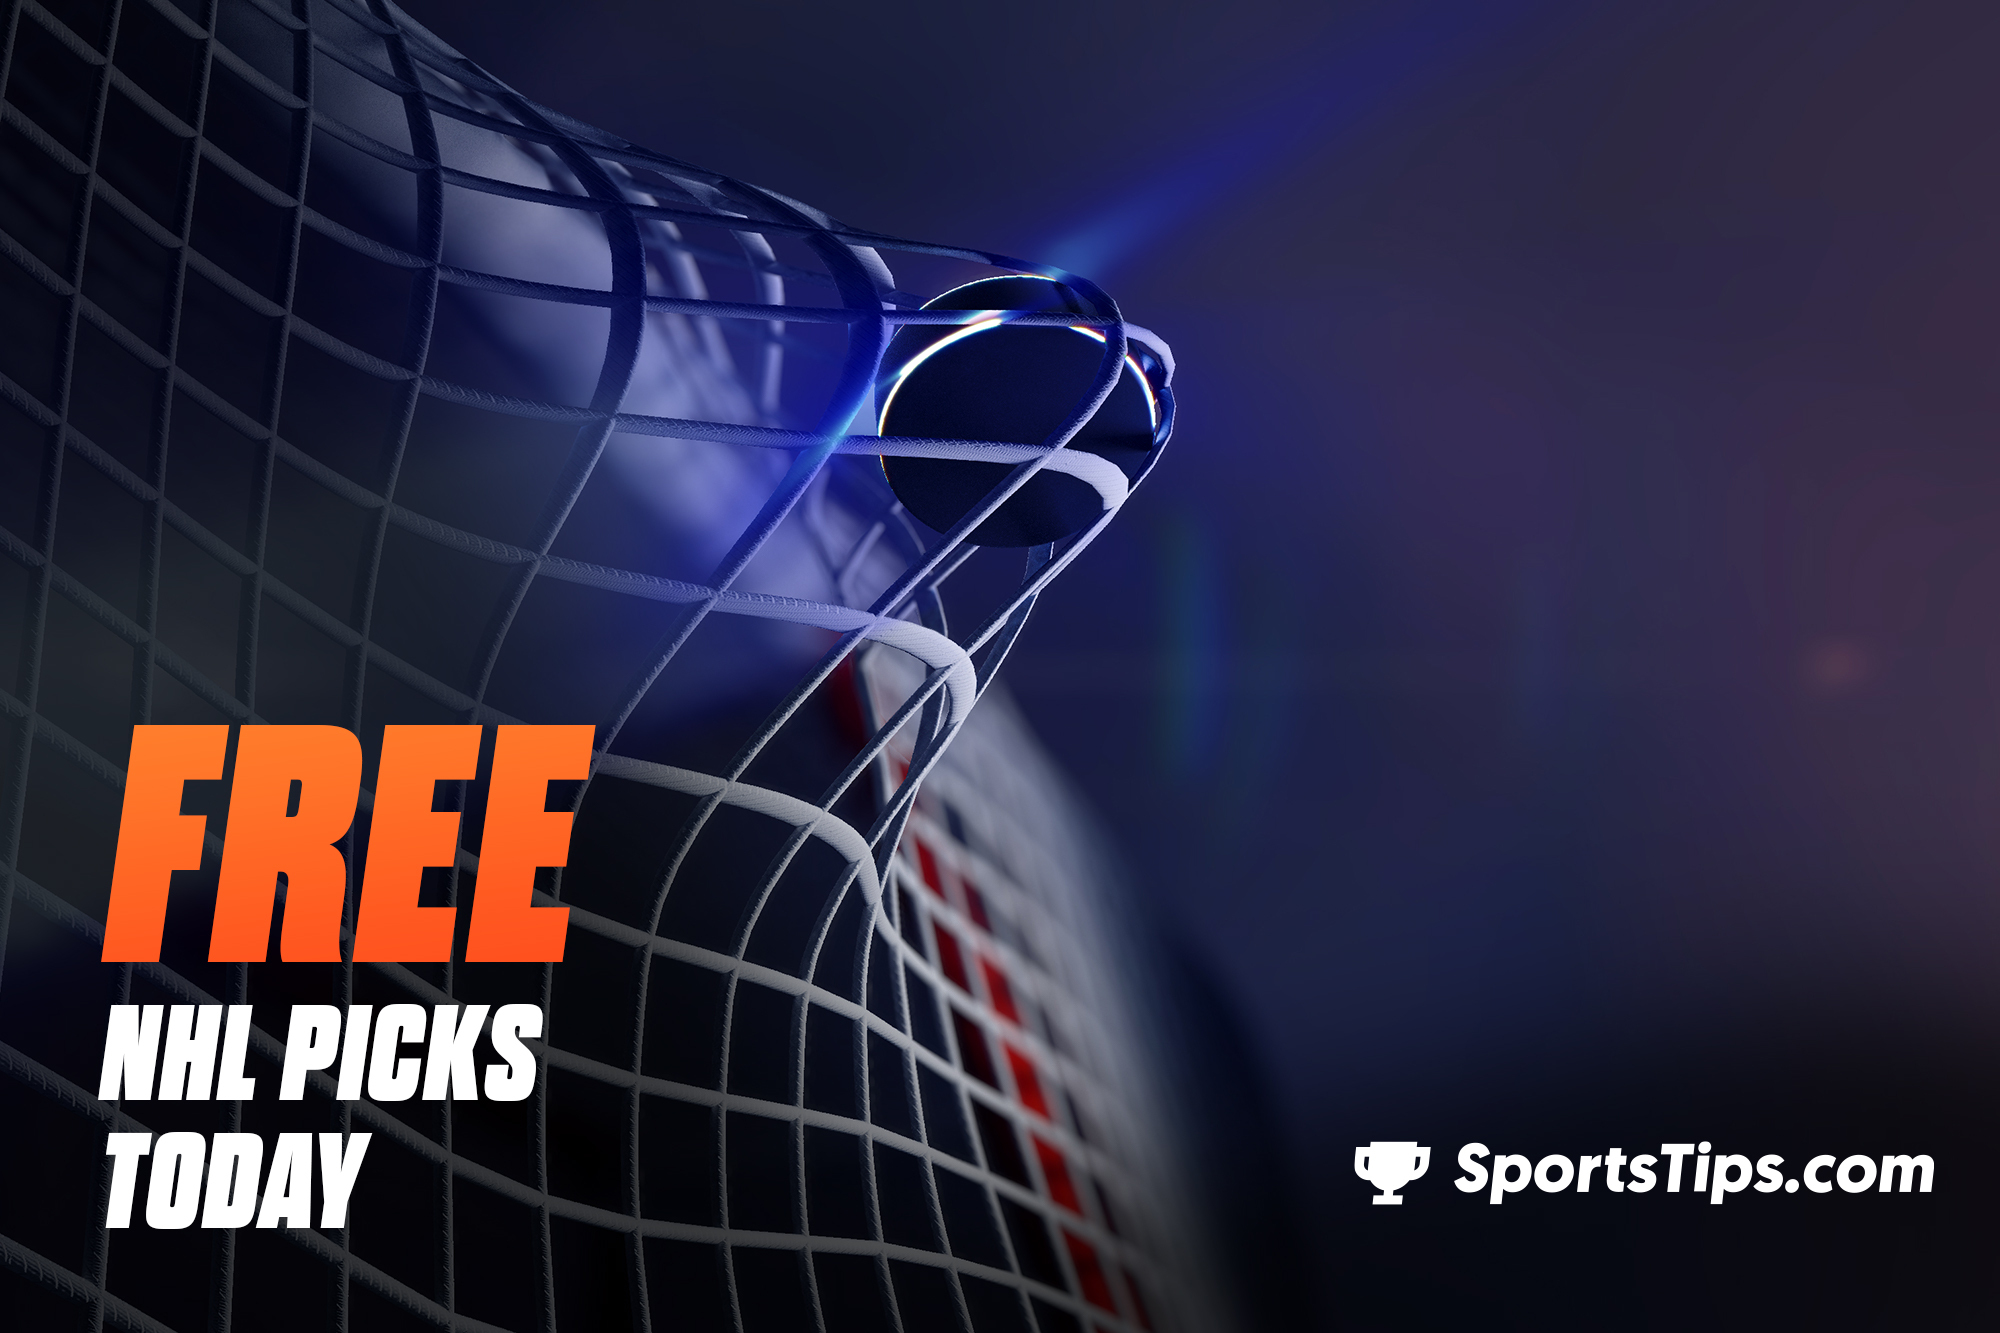 Free NHL Picks Today for Wednesday, April 13th, 2022